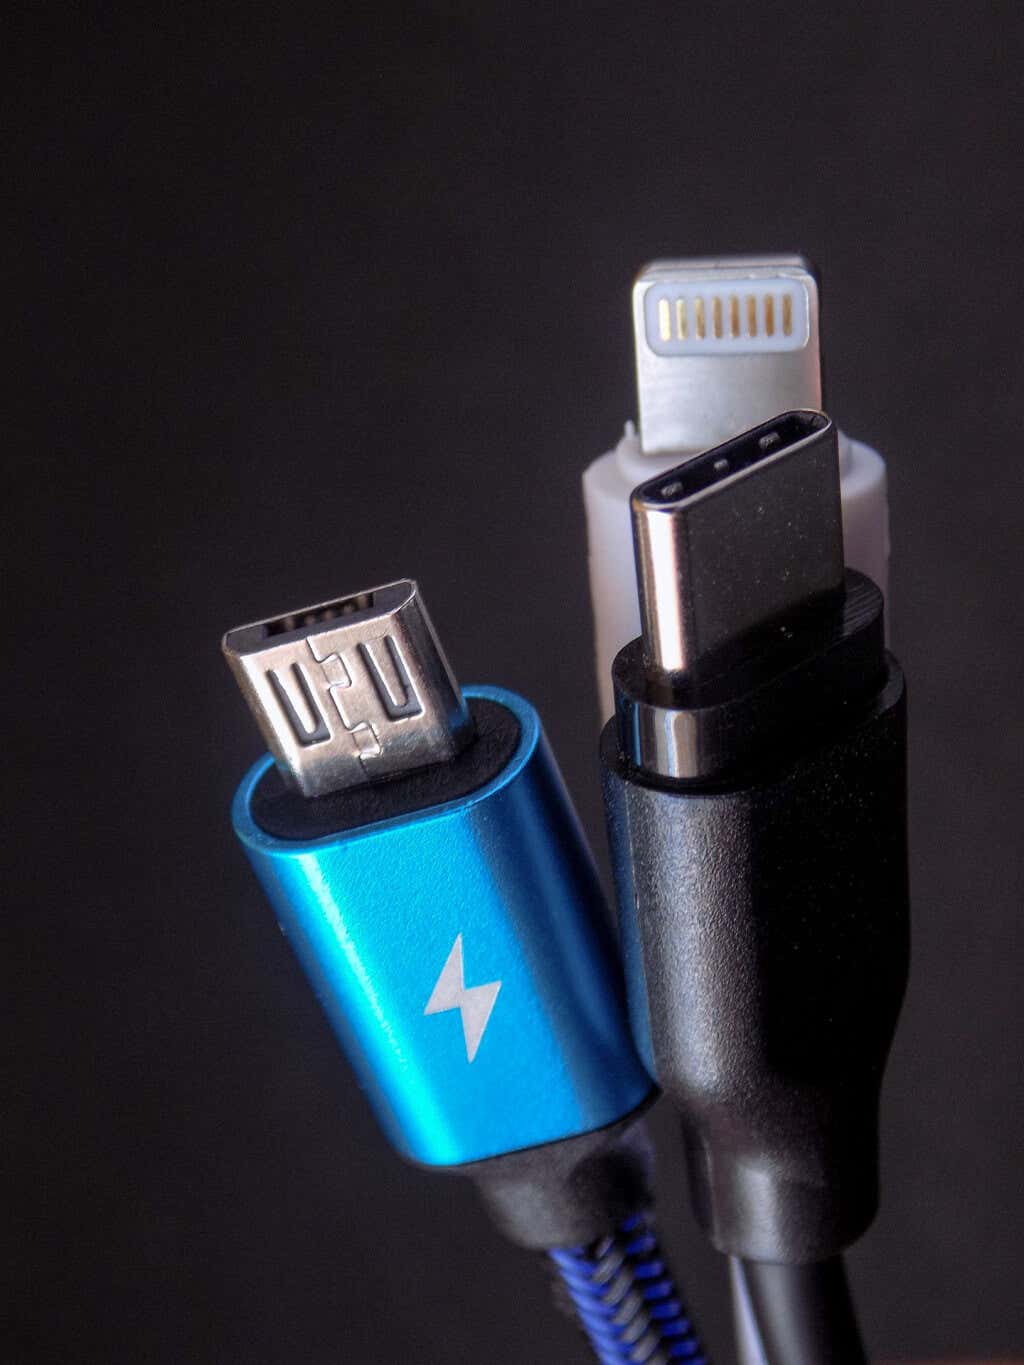 What's the Difference Between USB-C and Lightning?